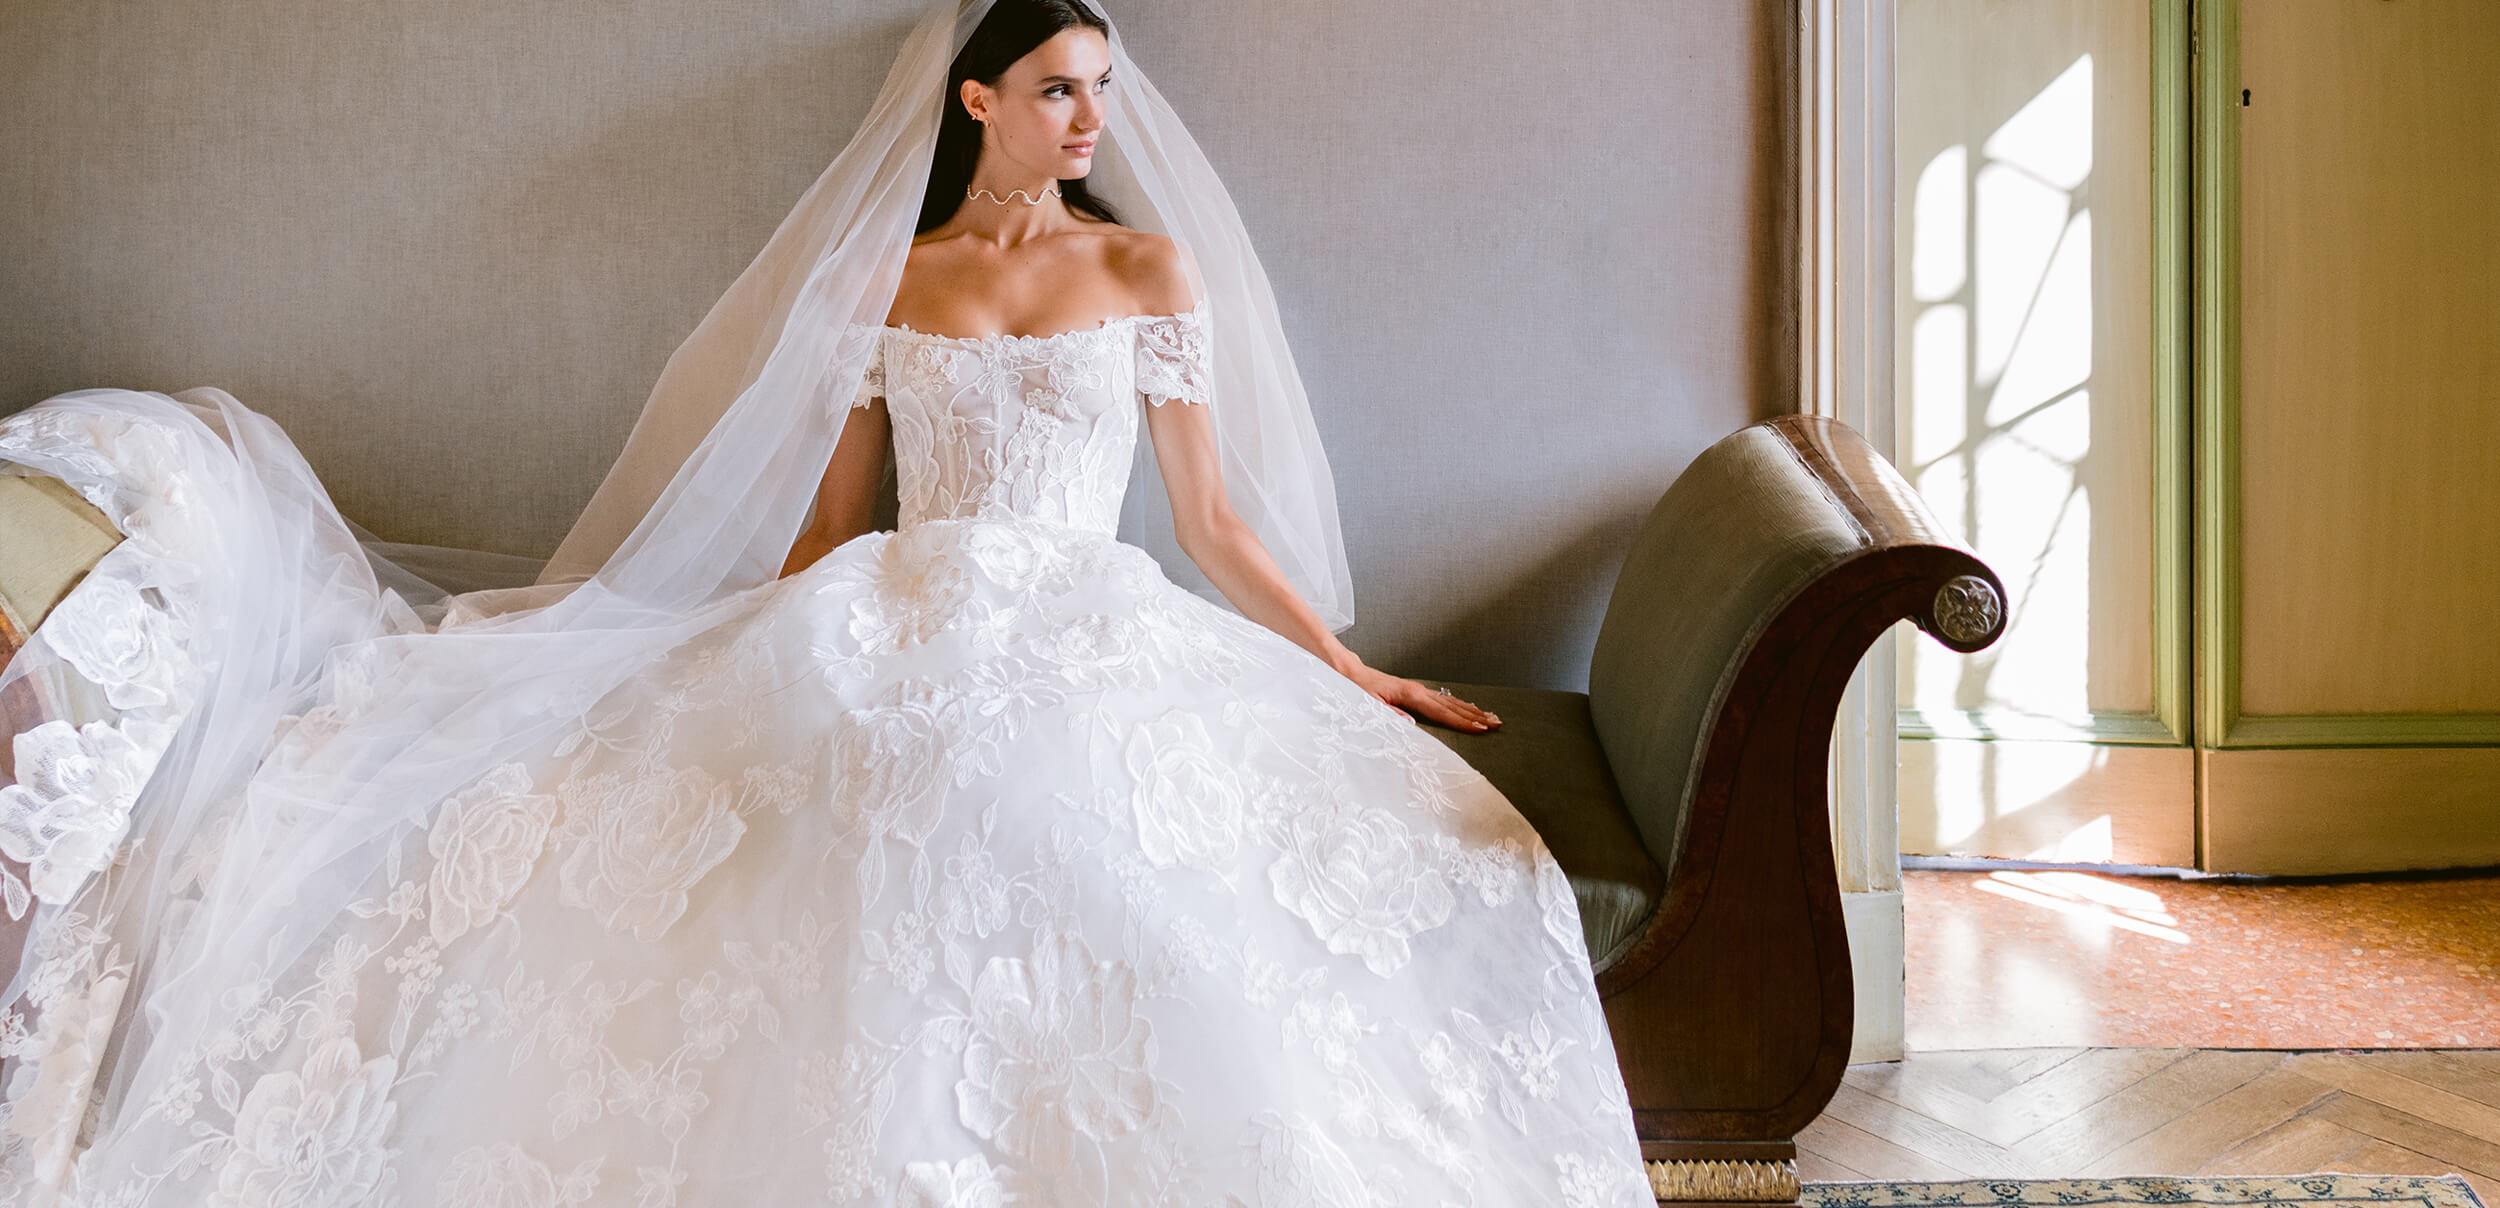 Athens Love Satin Bridal Gown